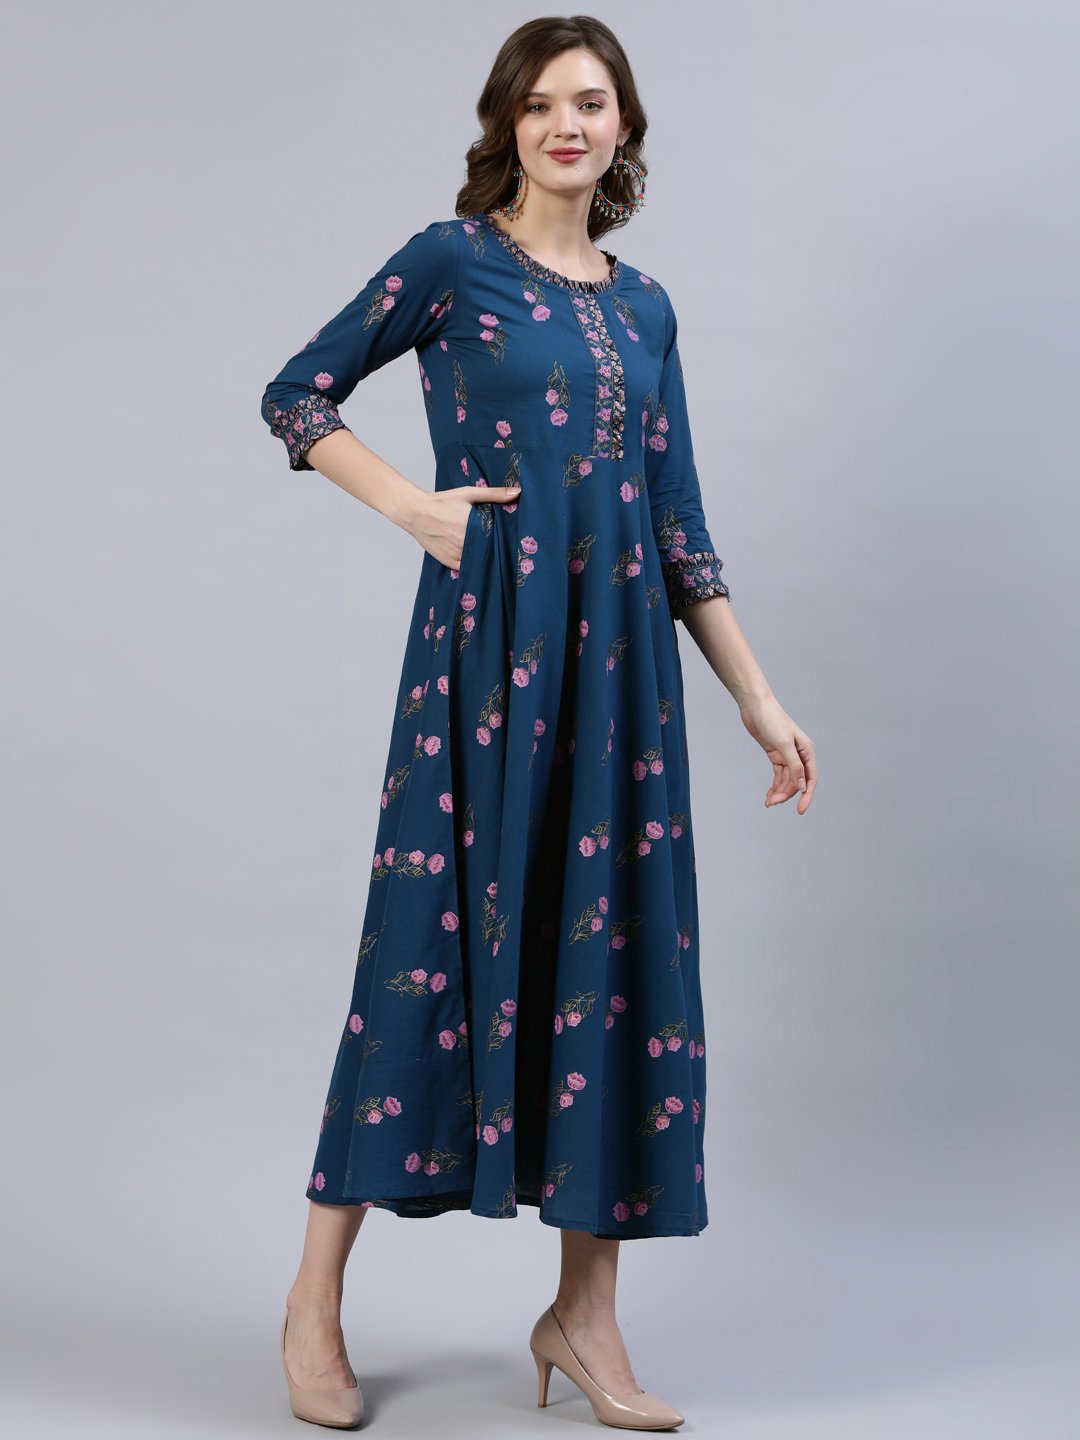 Women's Blue Floral Printed Dress With Embroidered Dupatta - Nayo Clothing